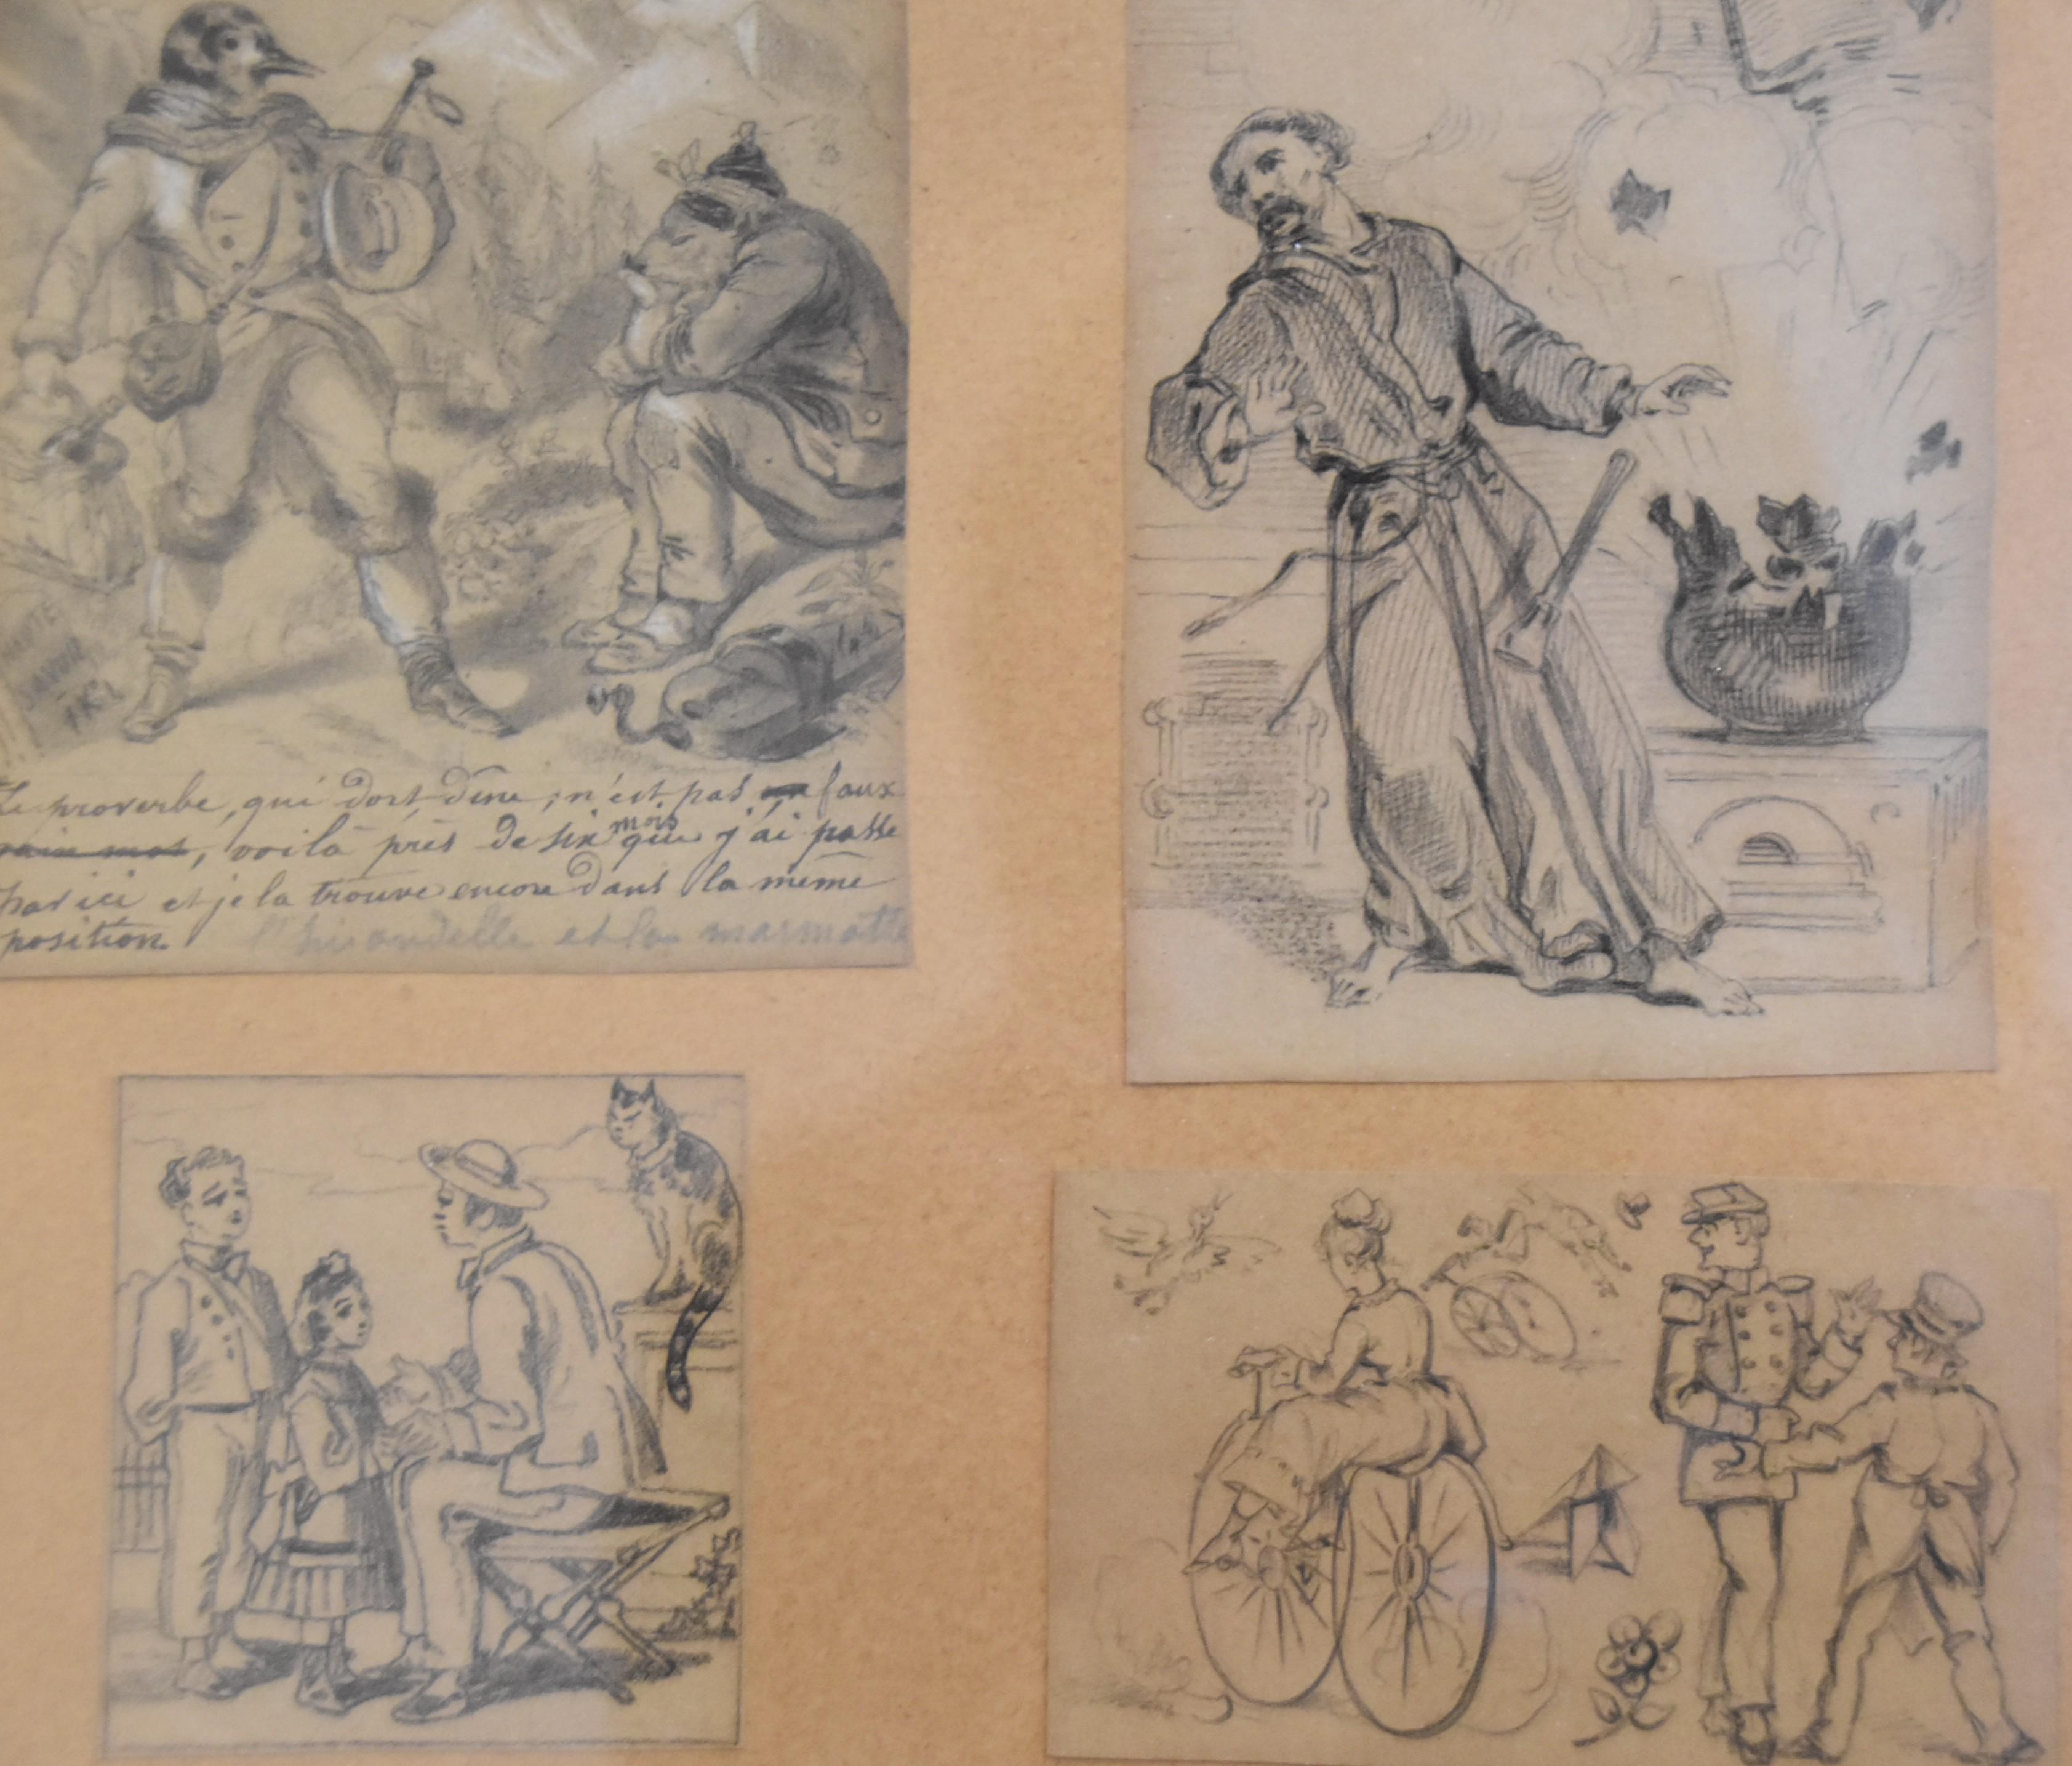 France, 19th century
Set of nine humoristic drawings, various subjects in the same mount
Black pencil, for some of them with highlights of white gouache
various dimensions : 6 x 5.5 cm to 11 x 7.5 cm
Dimensions of the mount 25 x 30 cm
Framed, frame